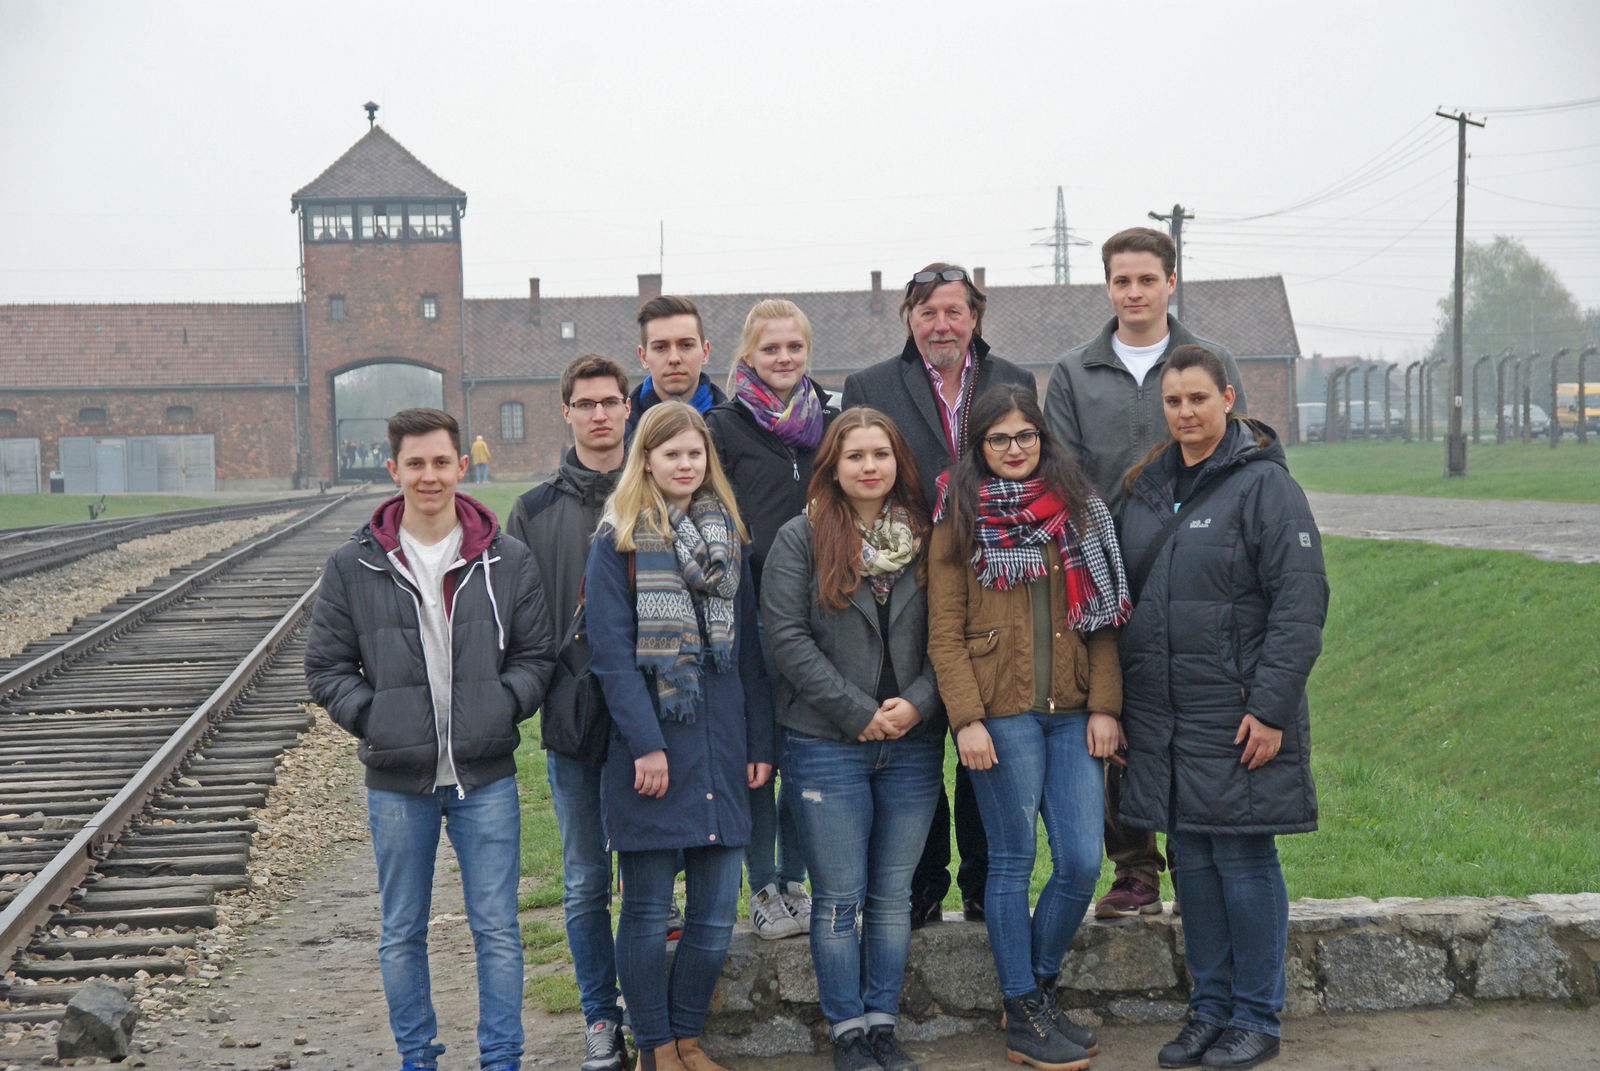 These apprentices worked at the Auschwitz memorial site: